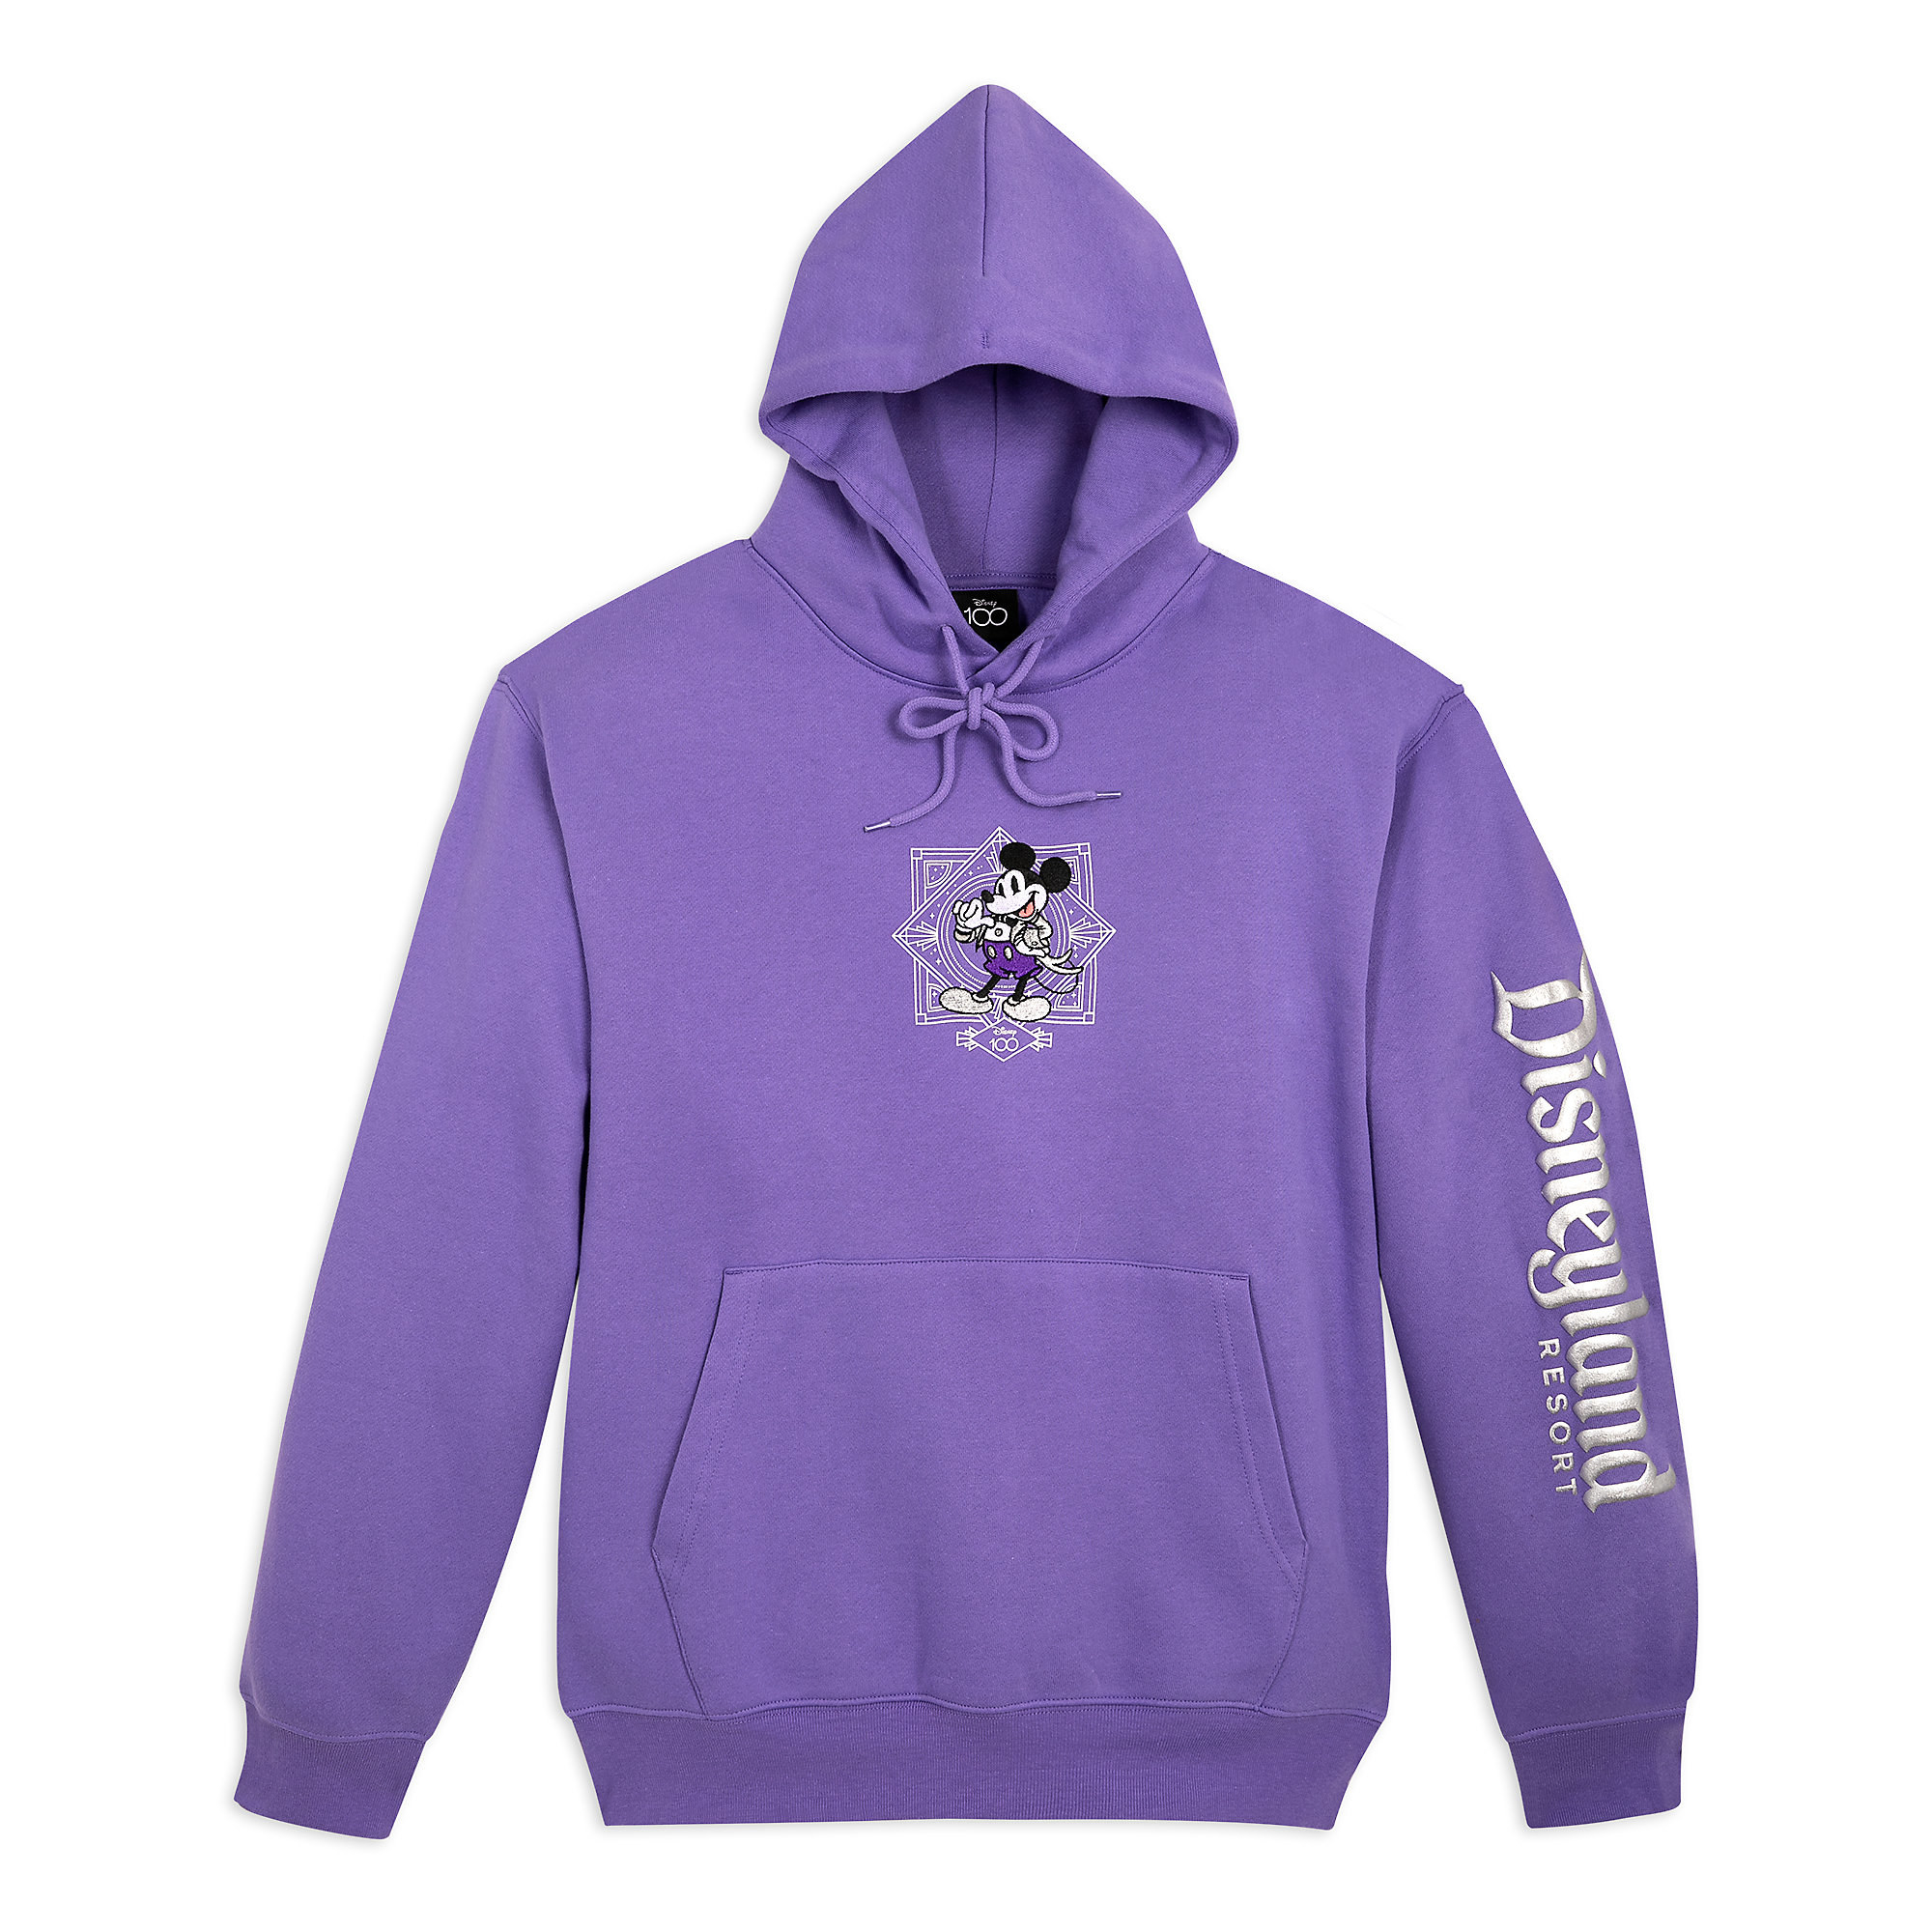 A long sleeved purple hoodie with mickey printed on the front in his tuxedo and disneyland resort printed down the left art